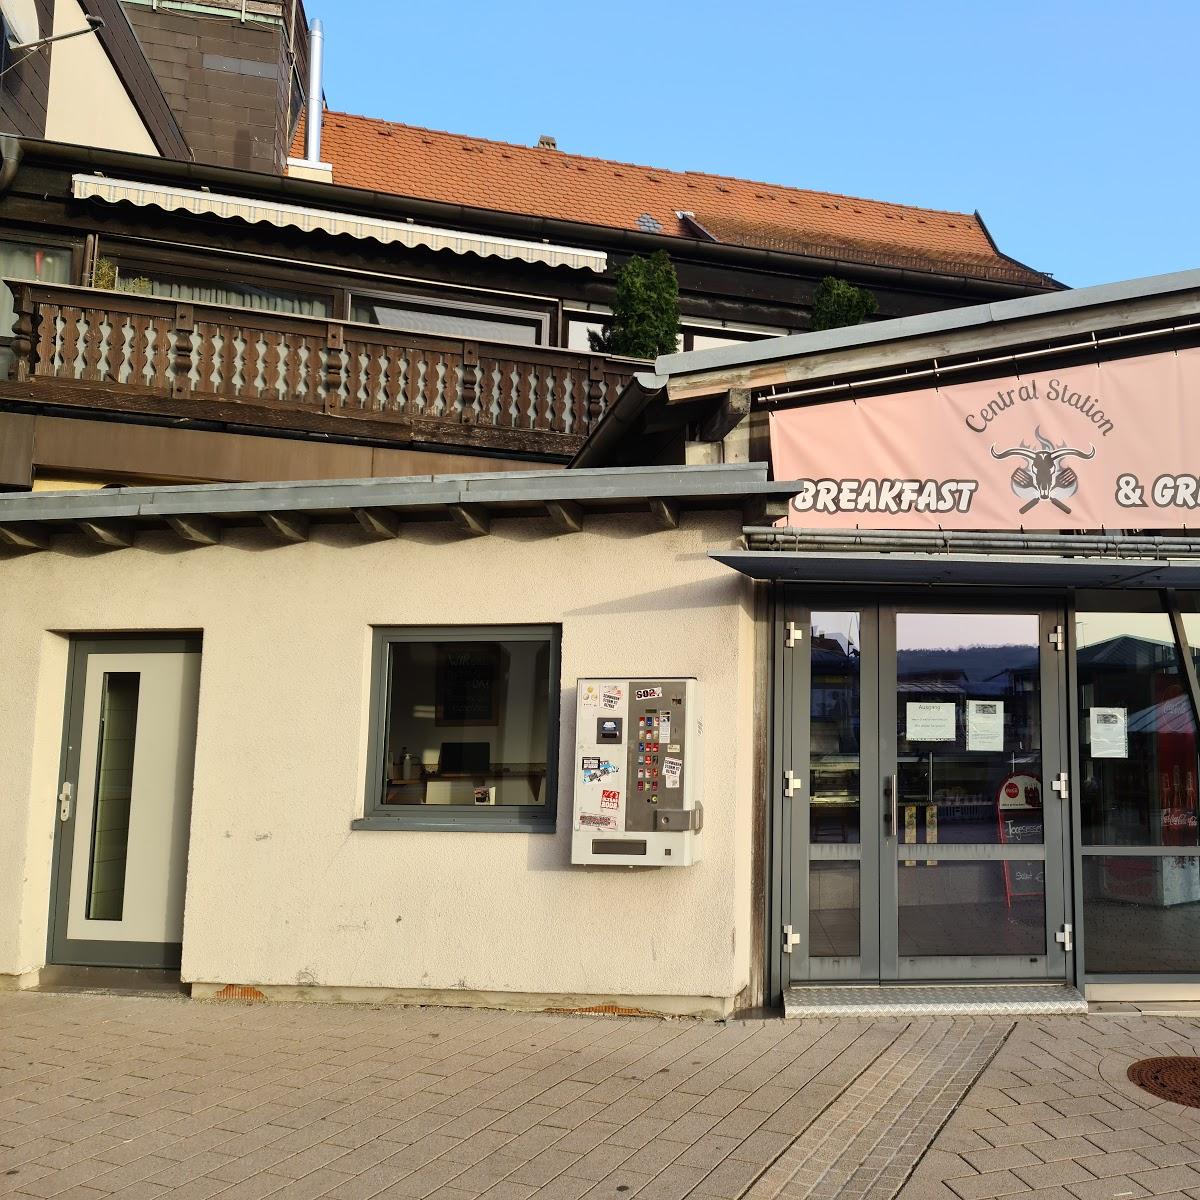 Restaurant "Central Station Imbiss" in Mosbach